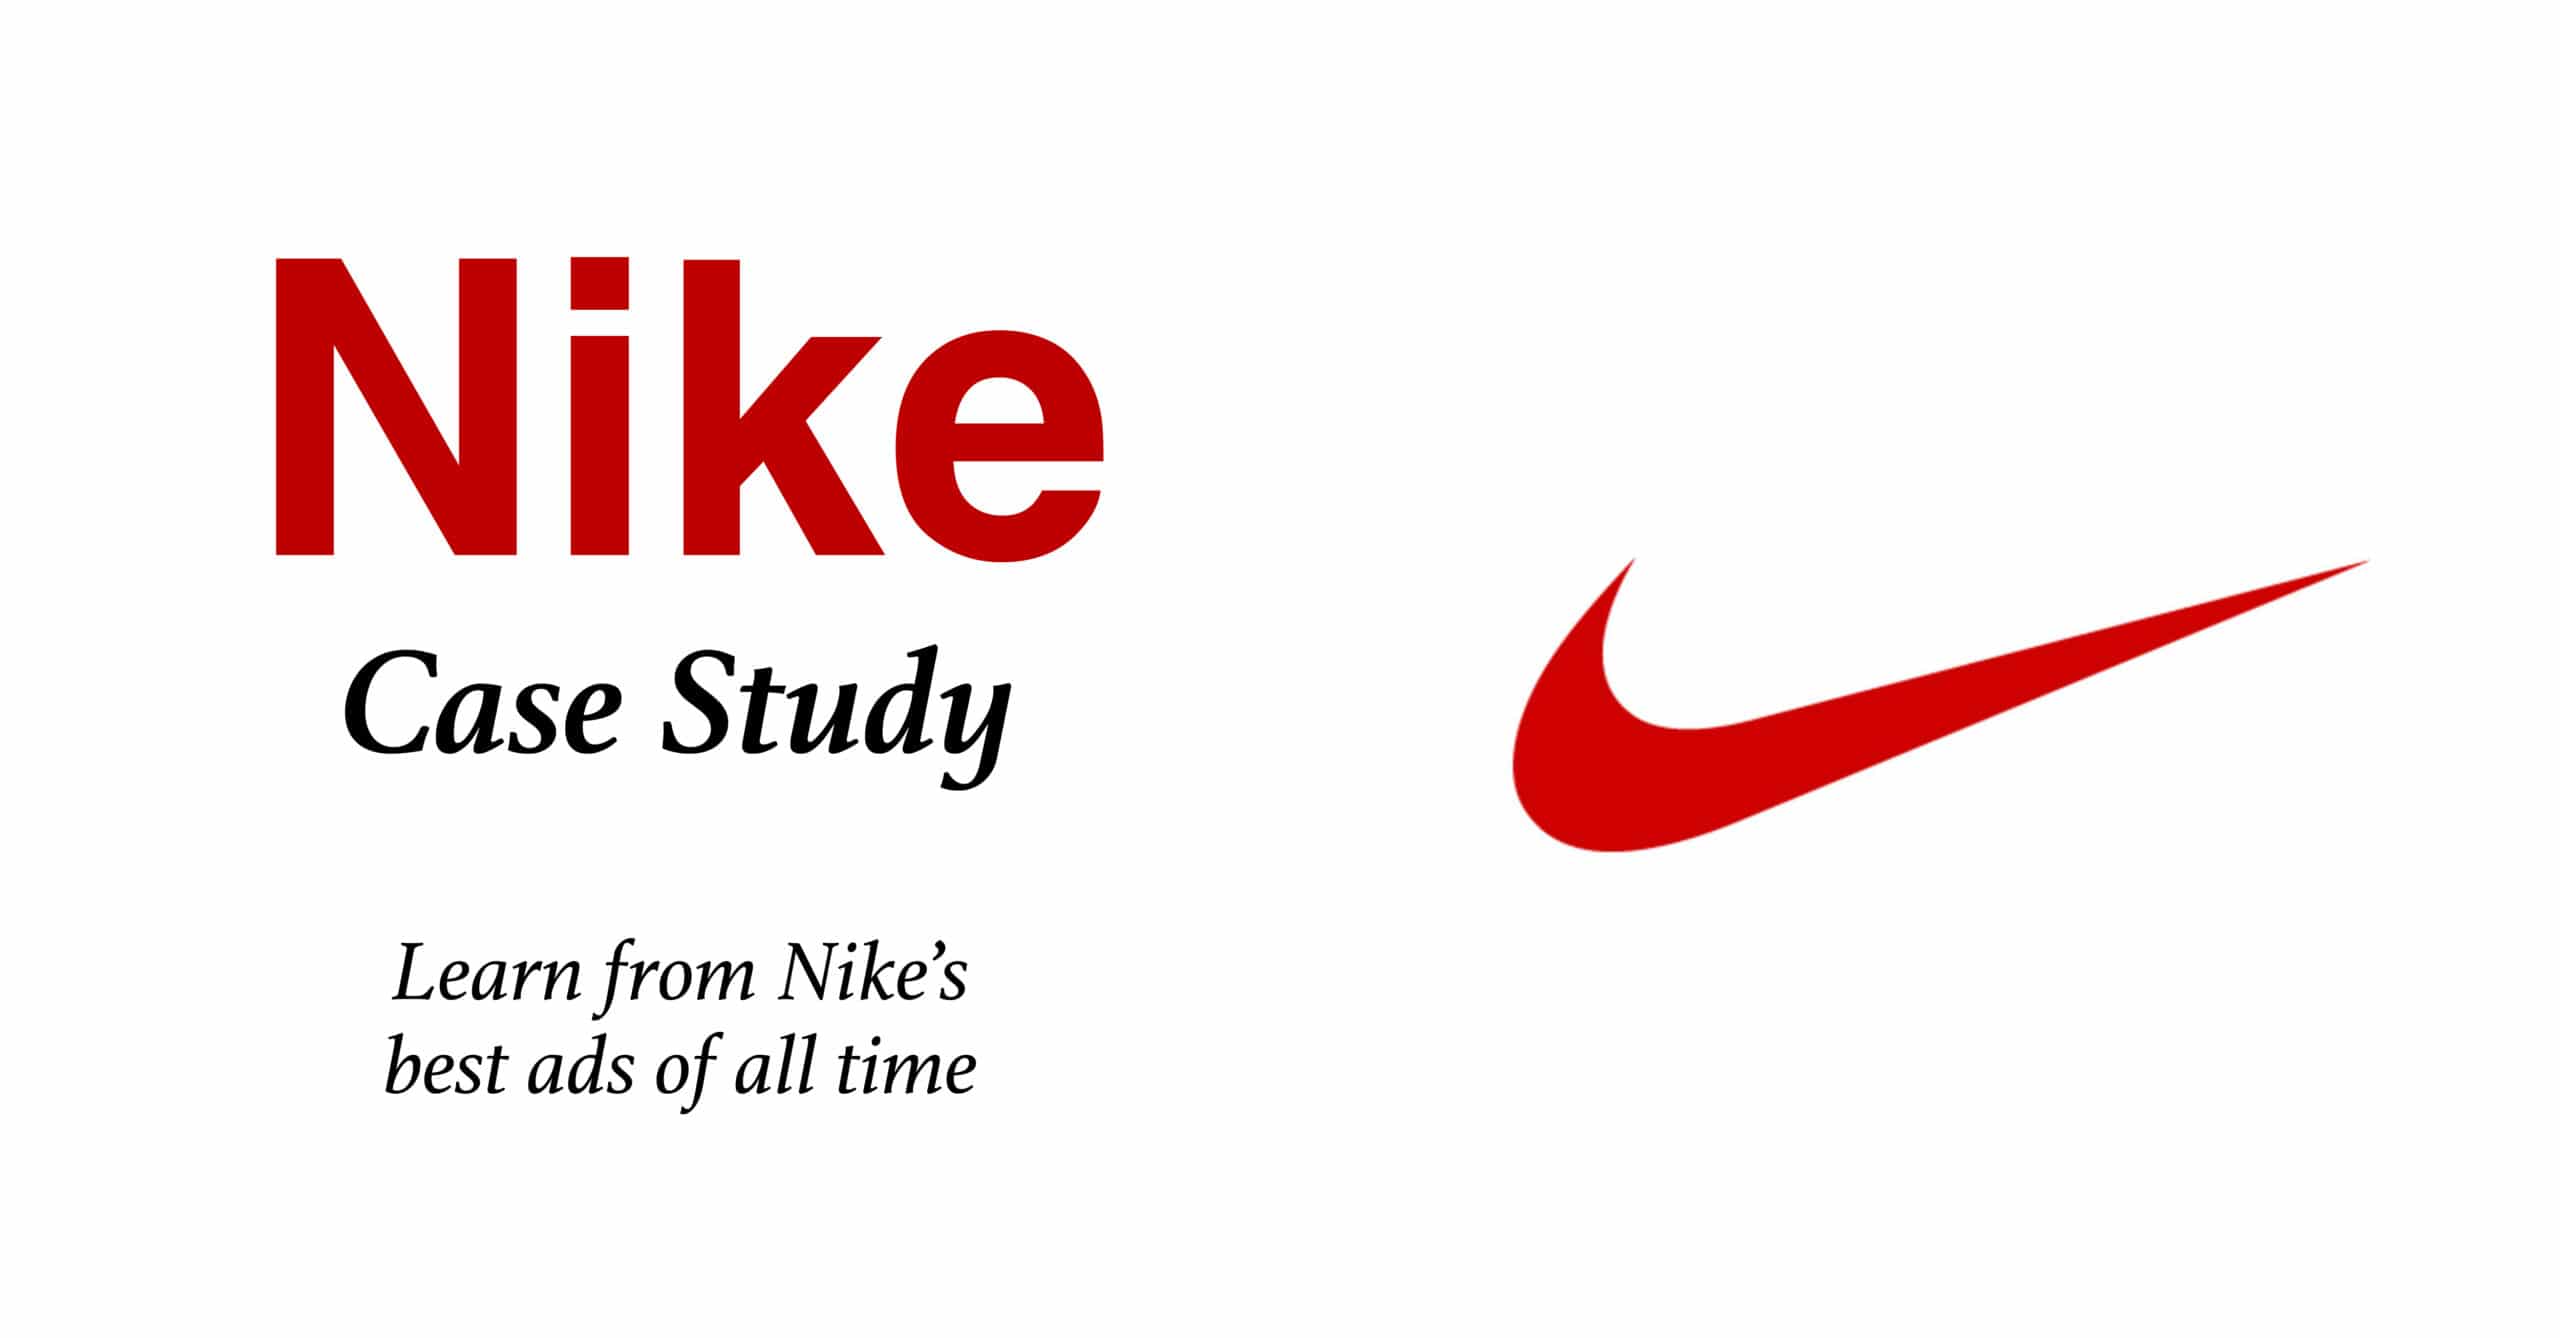 case study: Get inspired best Nike of all time